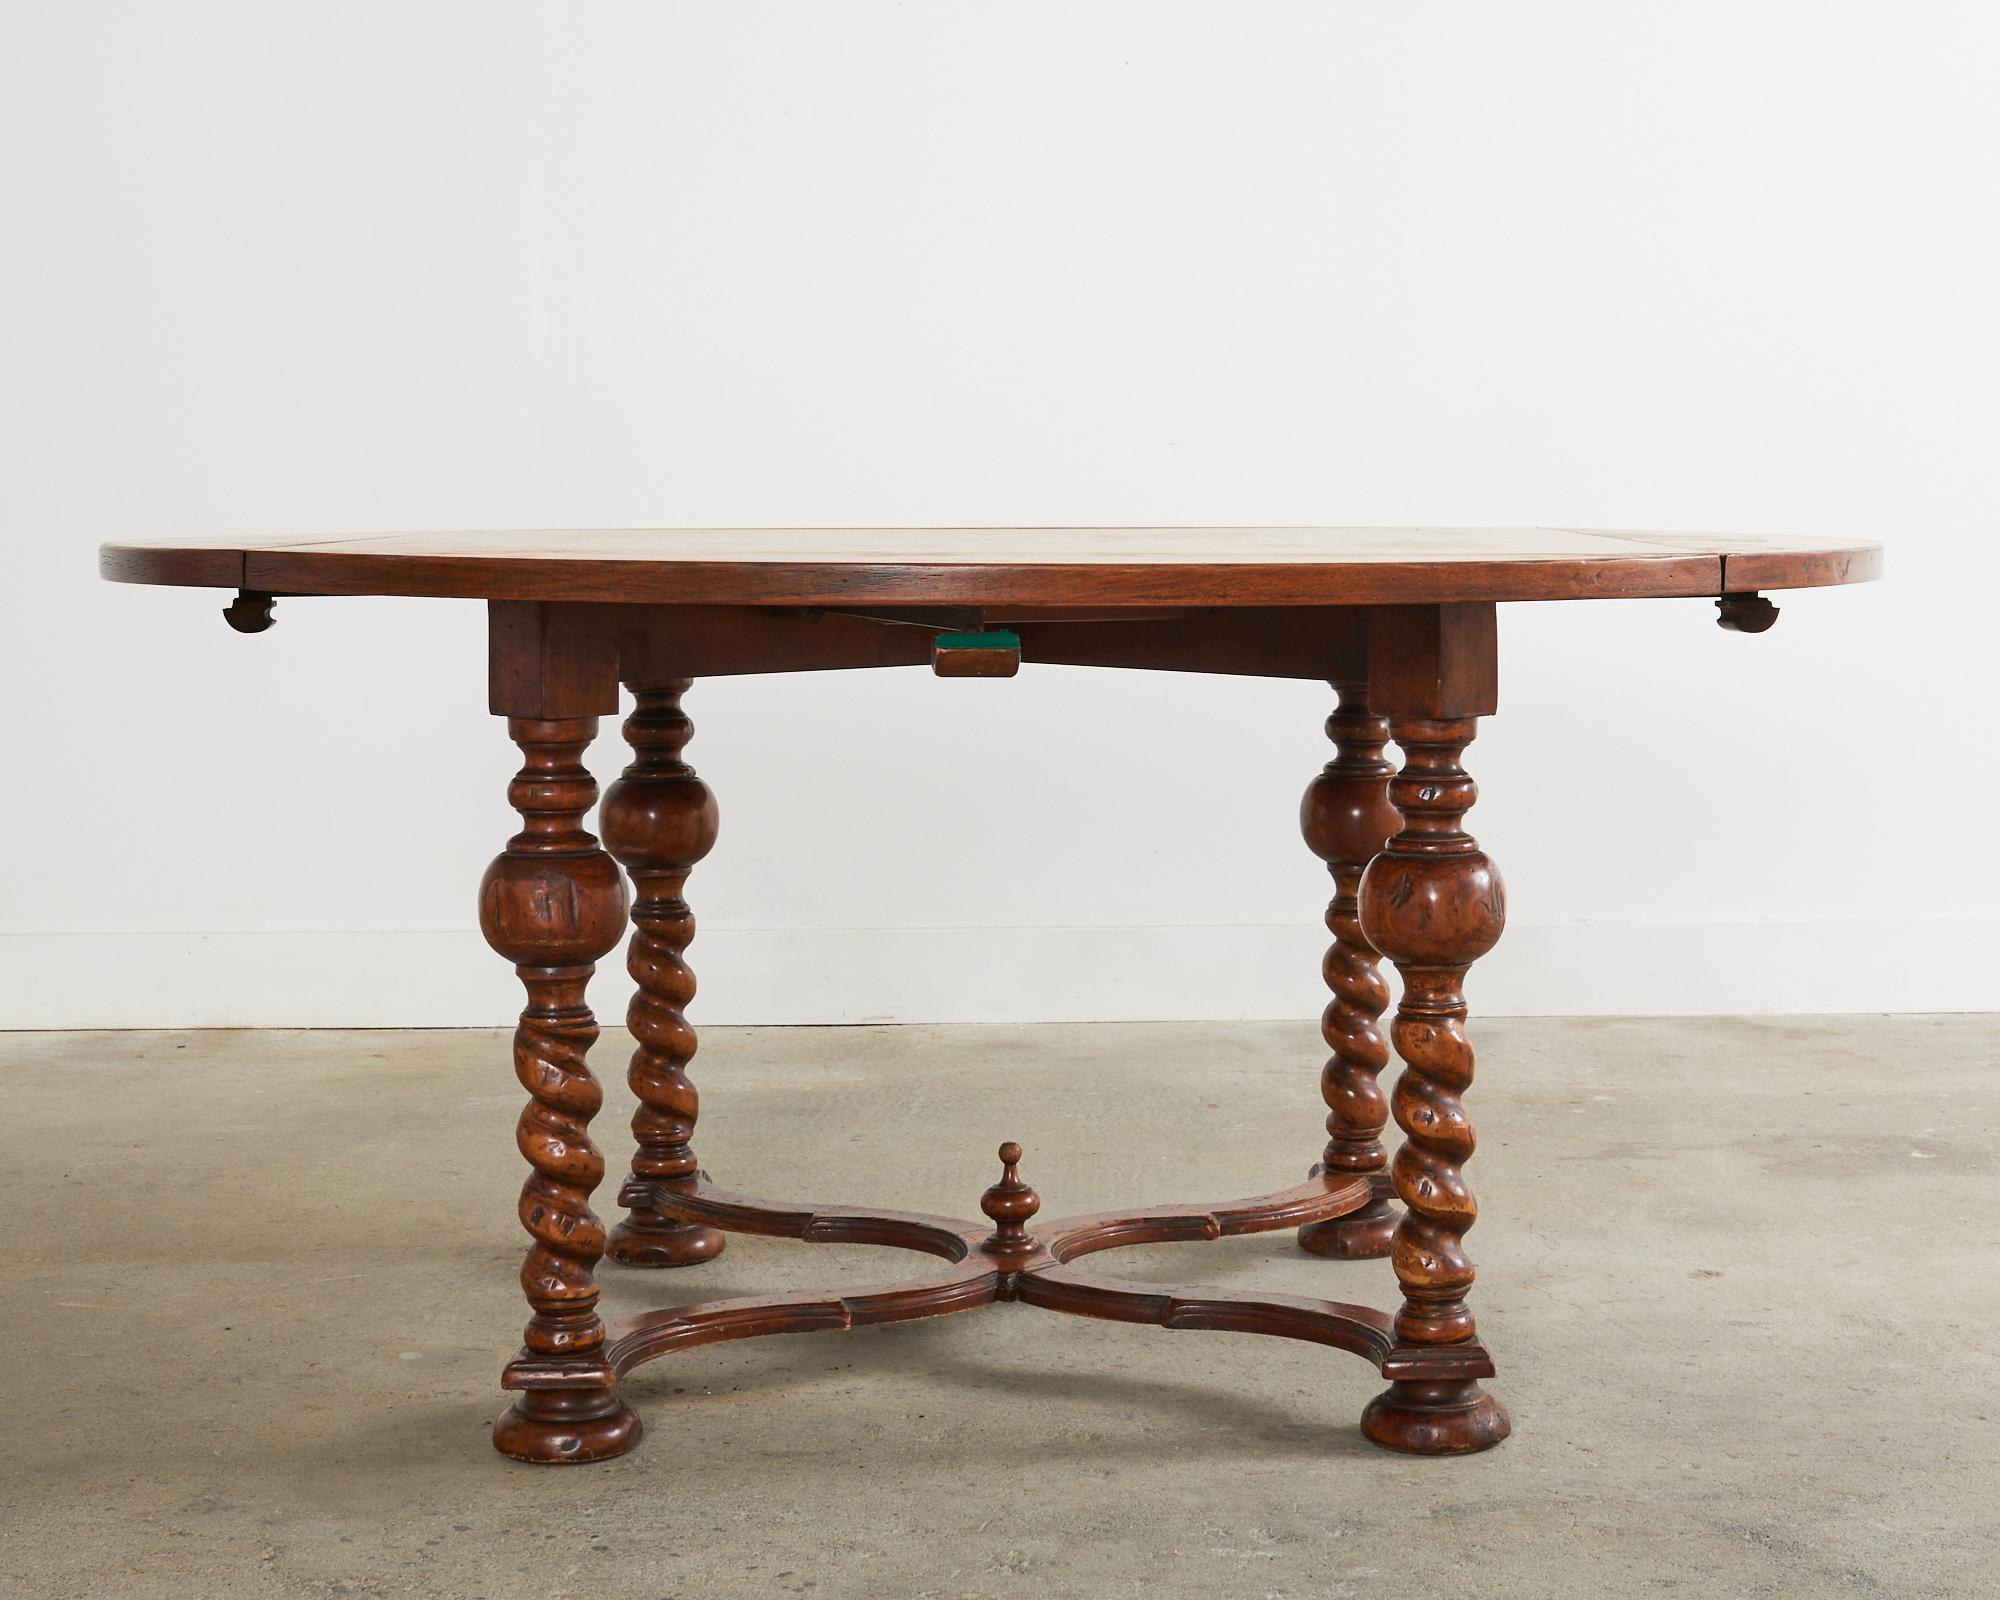 20th Century English William and Mary Style Barley Twist Dining Table